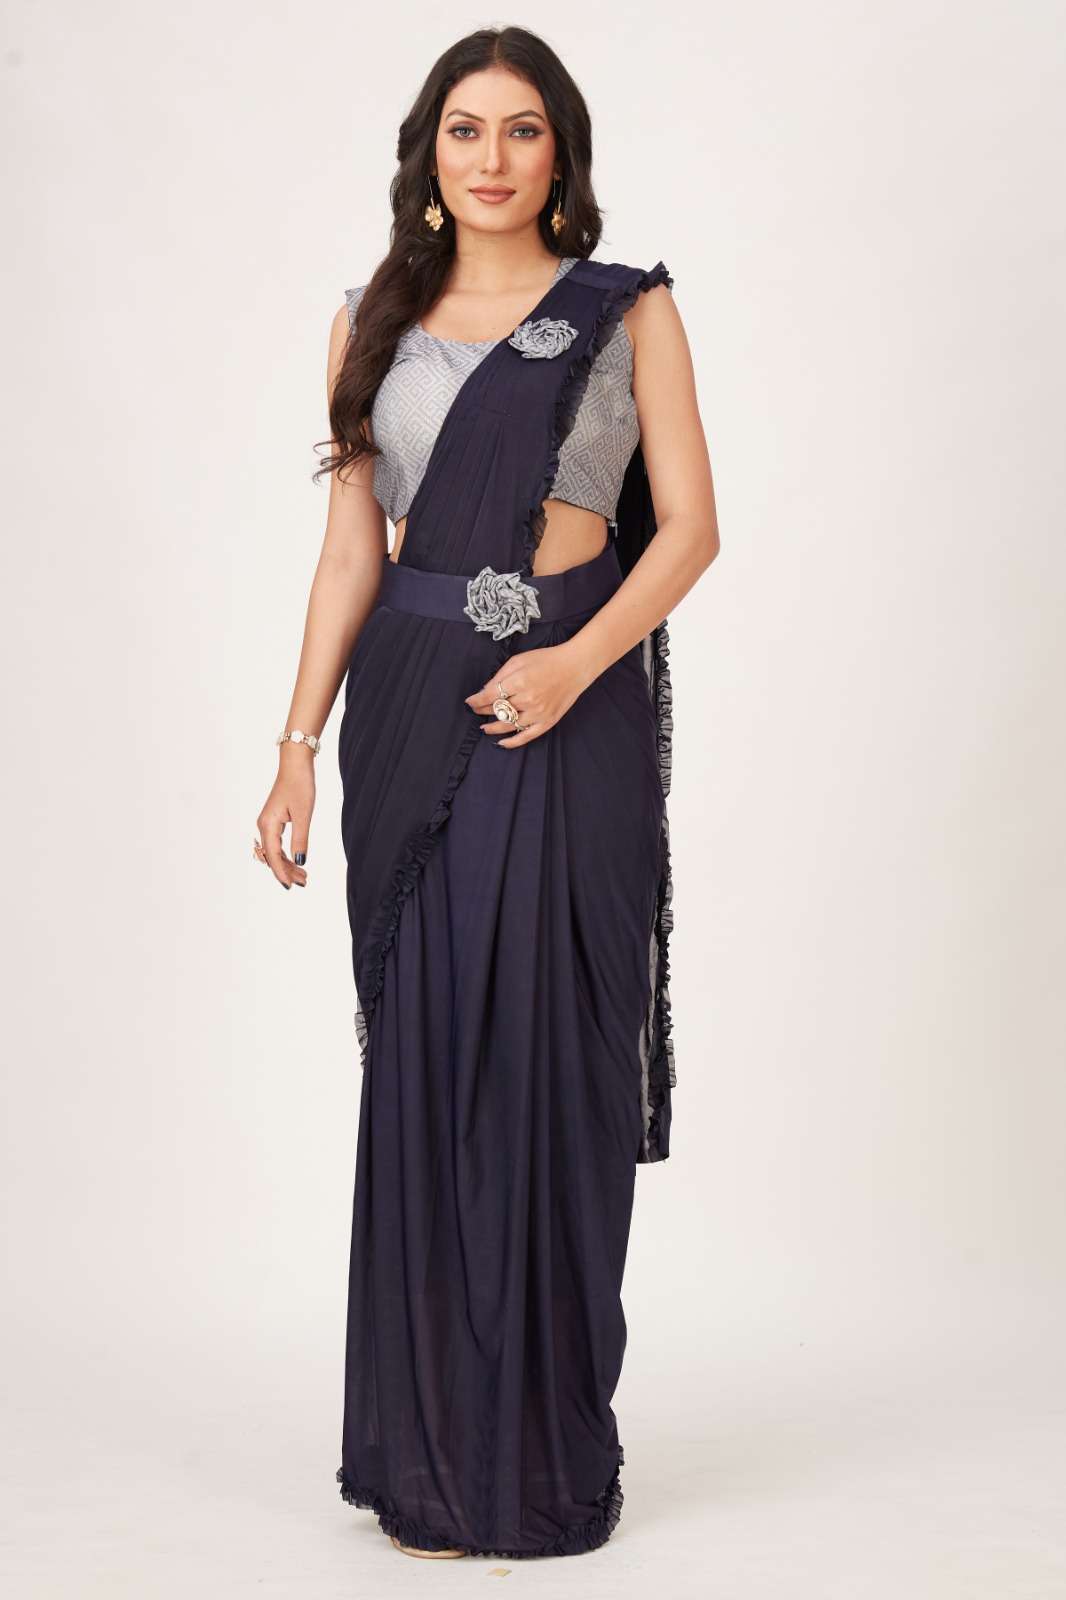 Trending: Where To Get Ruffled Sarees From! | WedMeGood